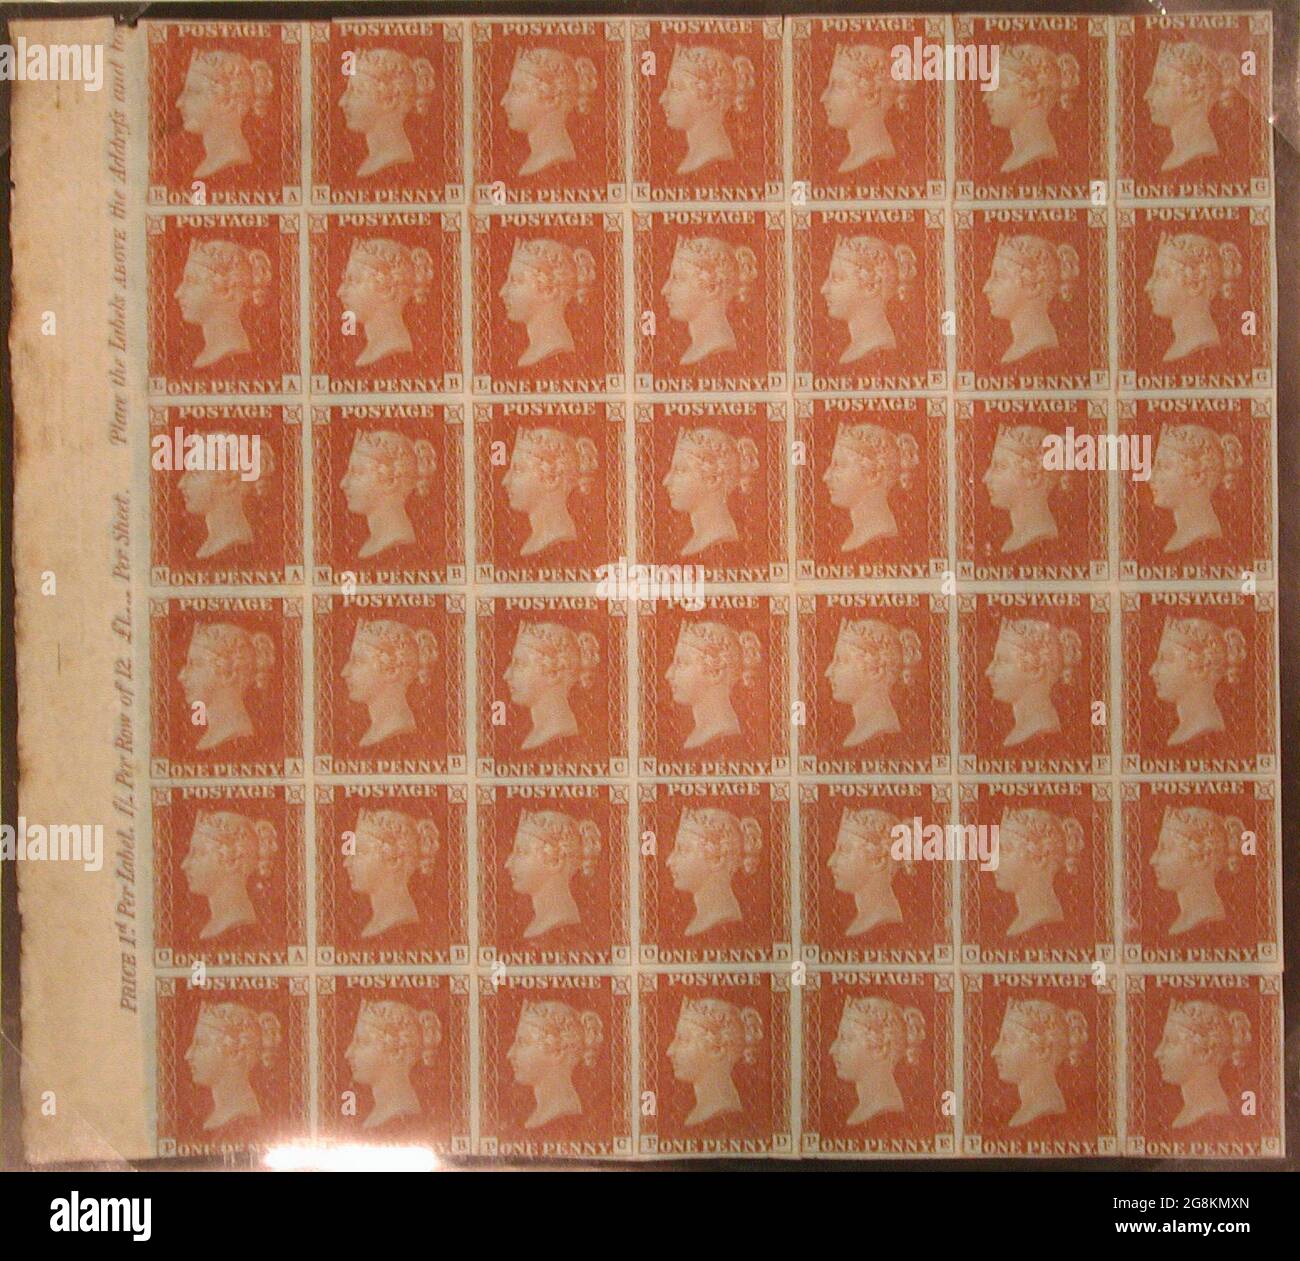 Unused block of forty-two 'Penny Red-Brown' postage stamps of Queen Victoria issued February 10, 1841 After a design by William Wyon British Stock Photo